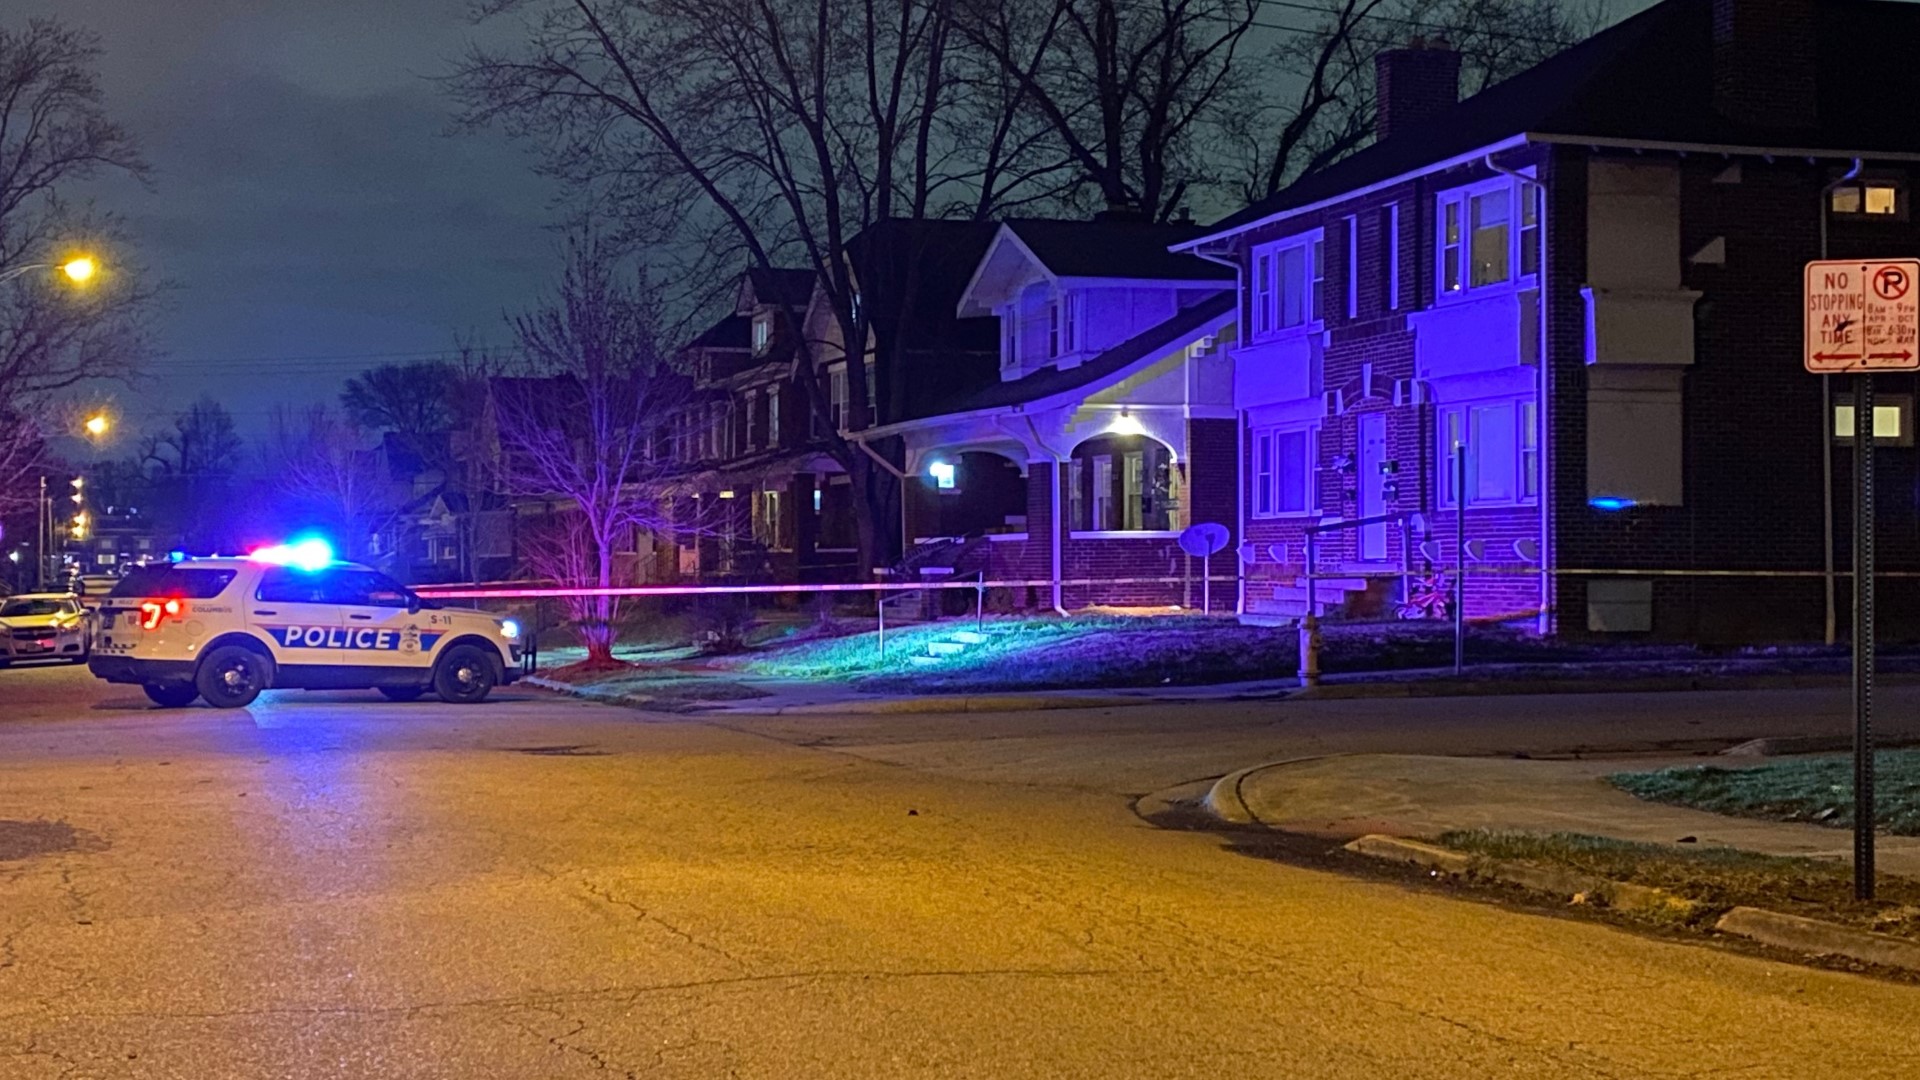 Officers were called to the 1000 block of Studer Avenue, near Roosevelt Park, around 9:45 p.m. for a reported shooting.